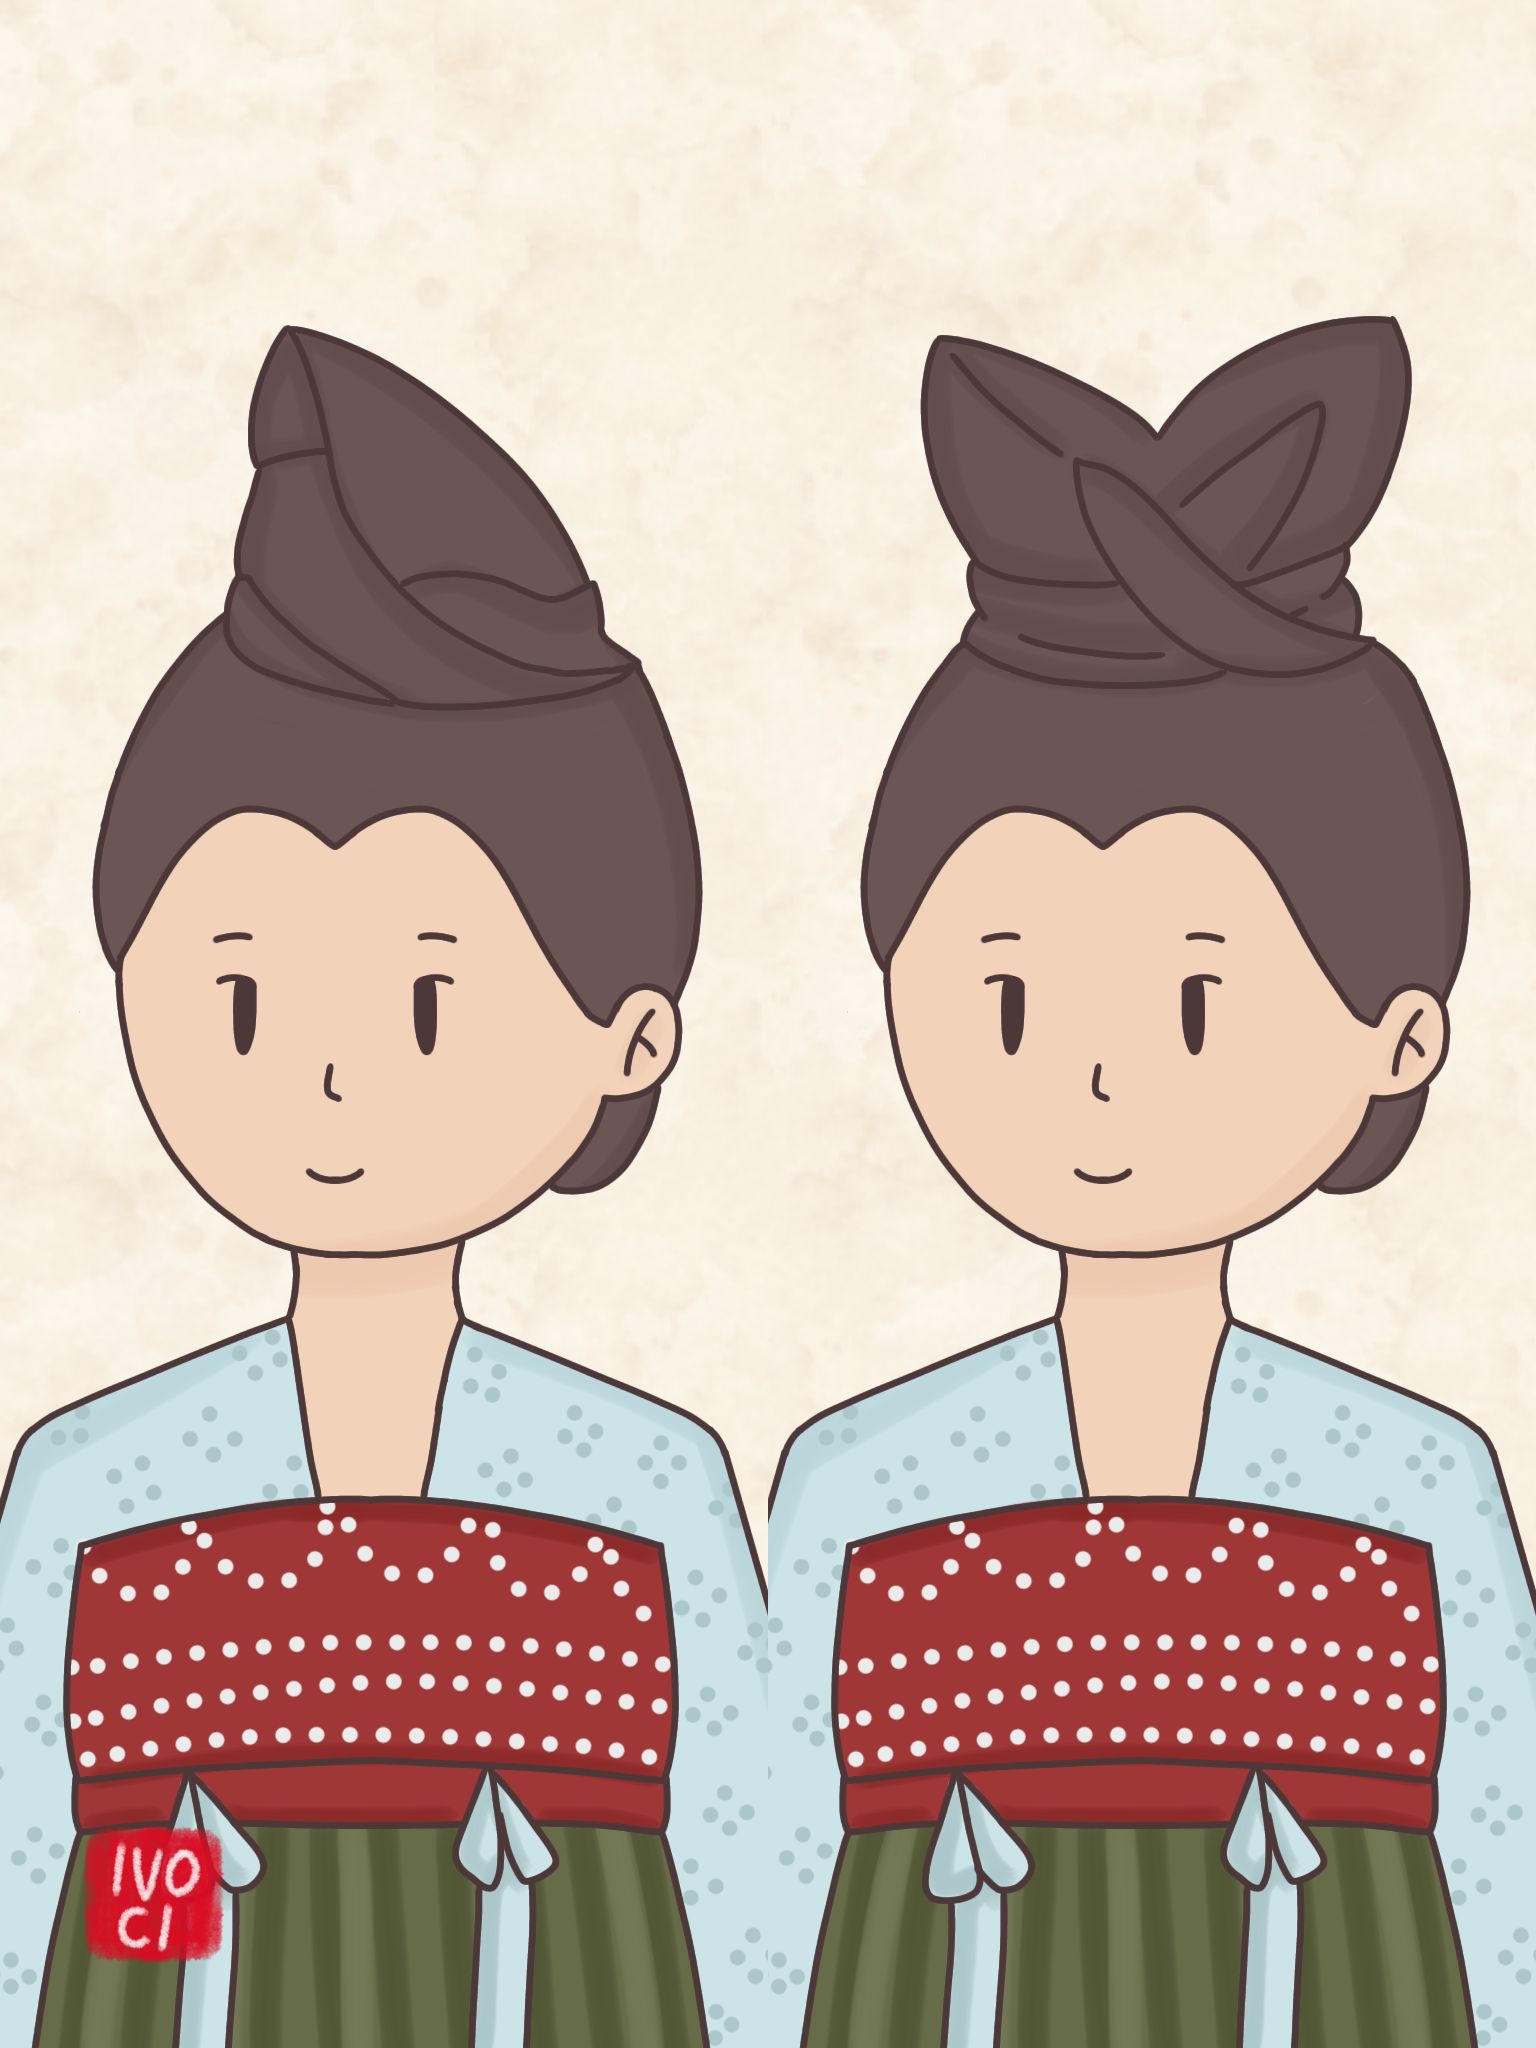 ivoci - Early Tang Dynasty Female Hairstyles - 2